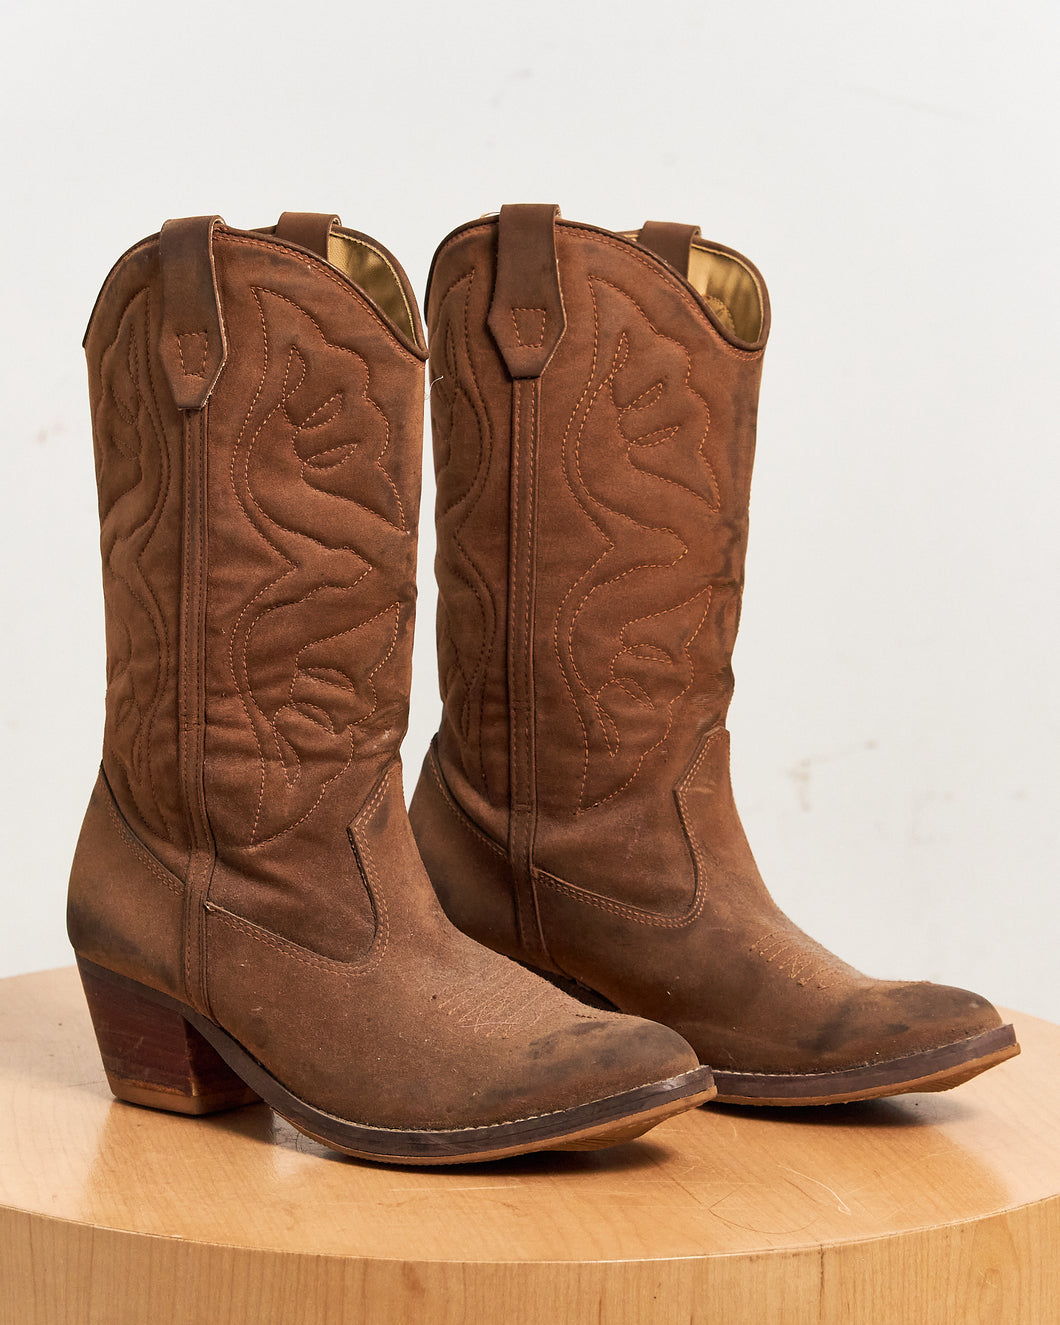 Cowboy Boots - Tall Brown Stitched Size 10